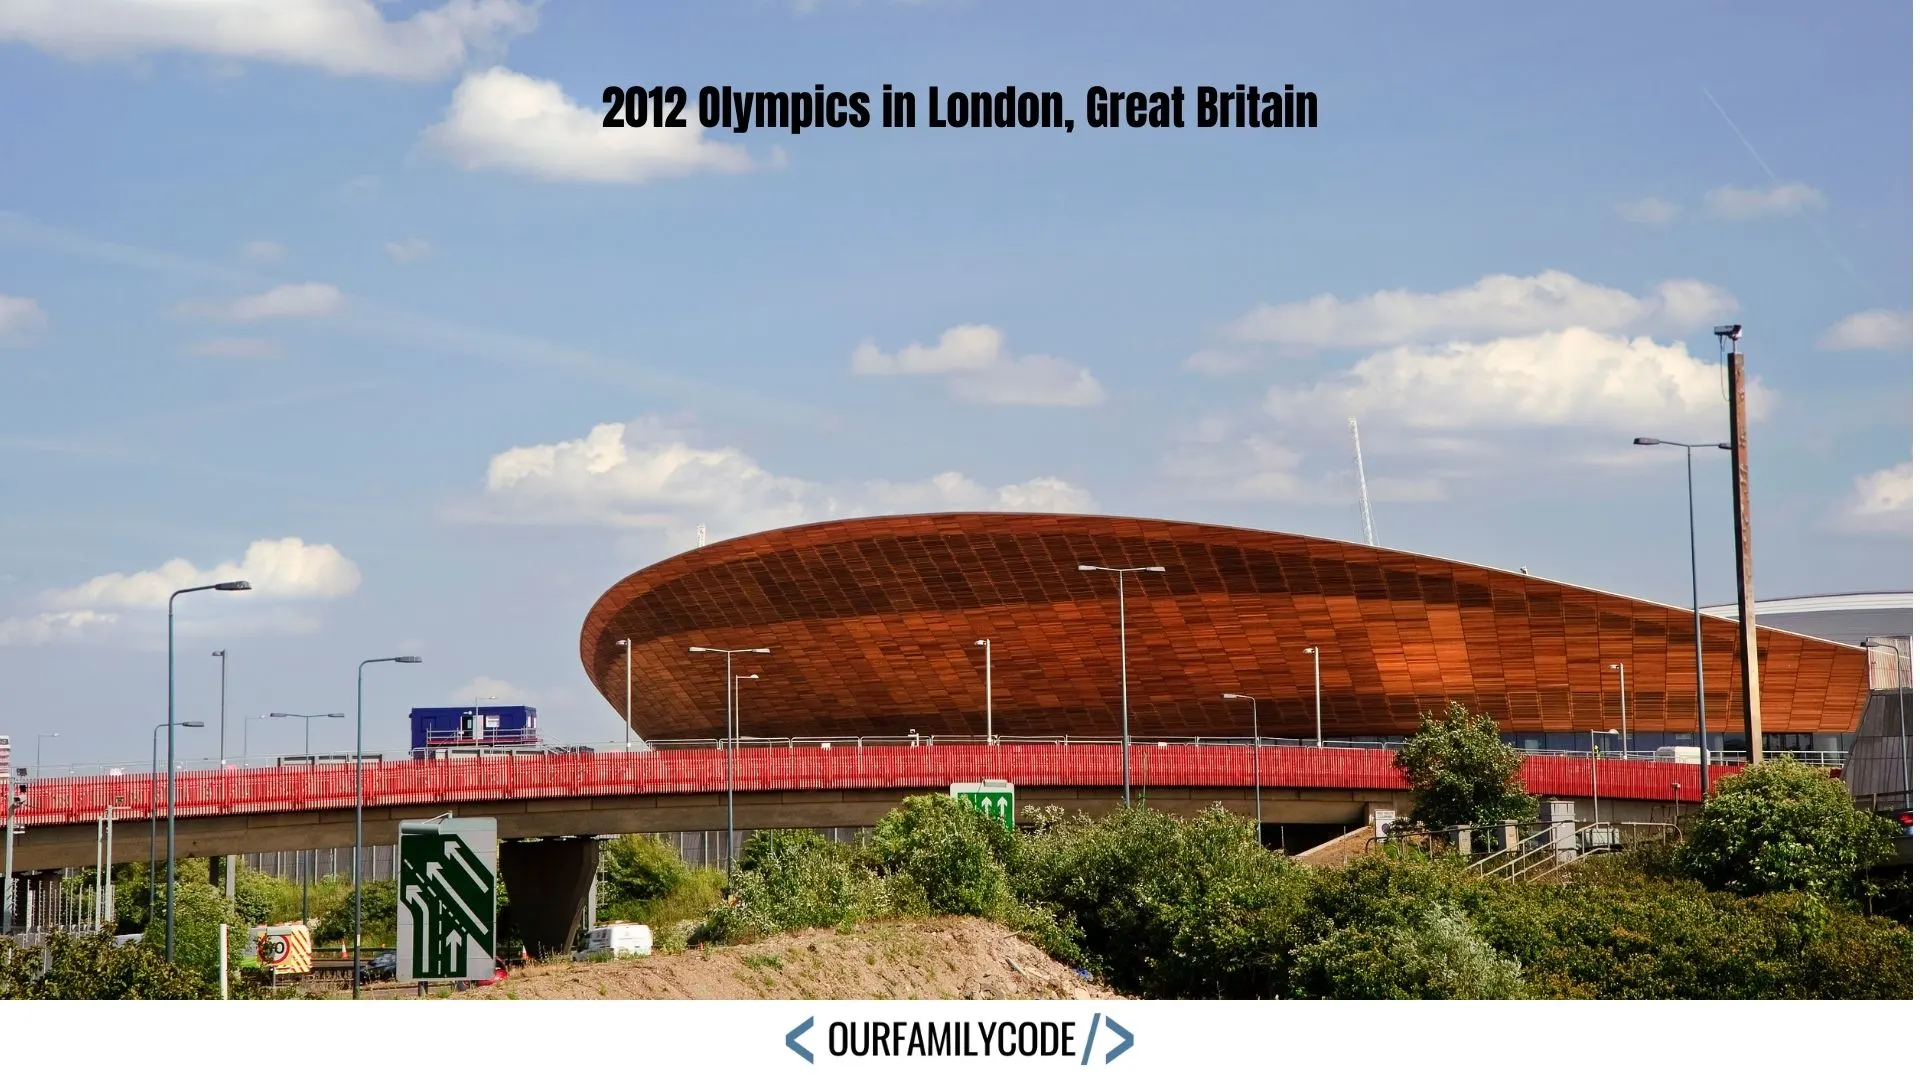 A picture of the 2012 Olympic Stadium in London.